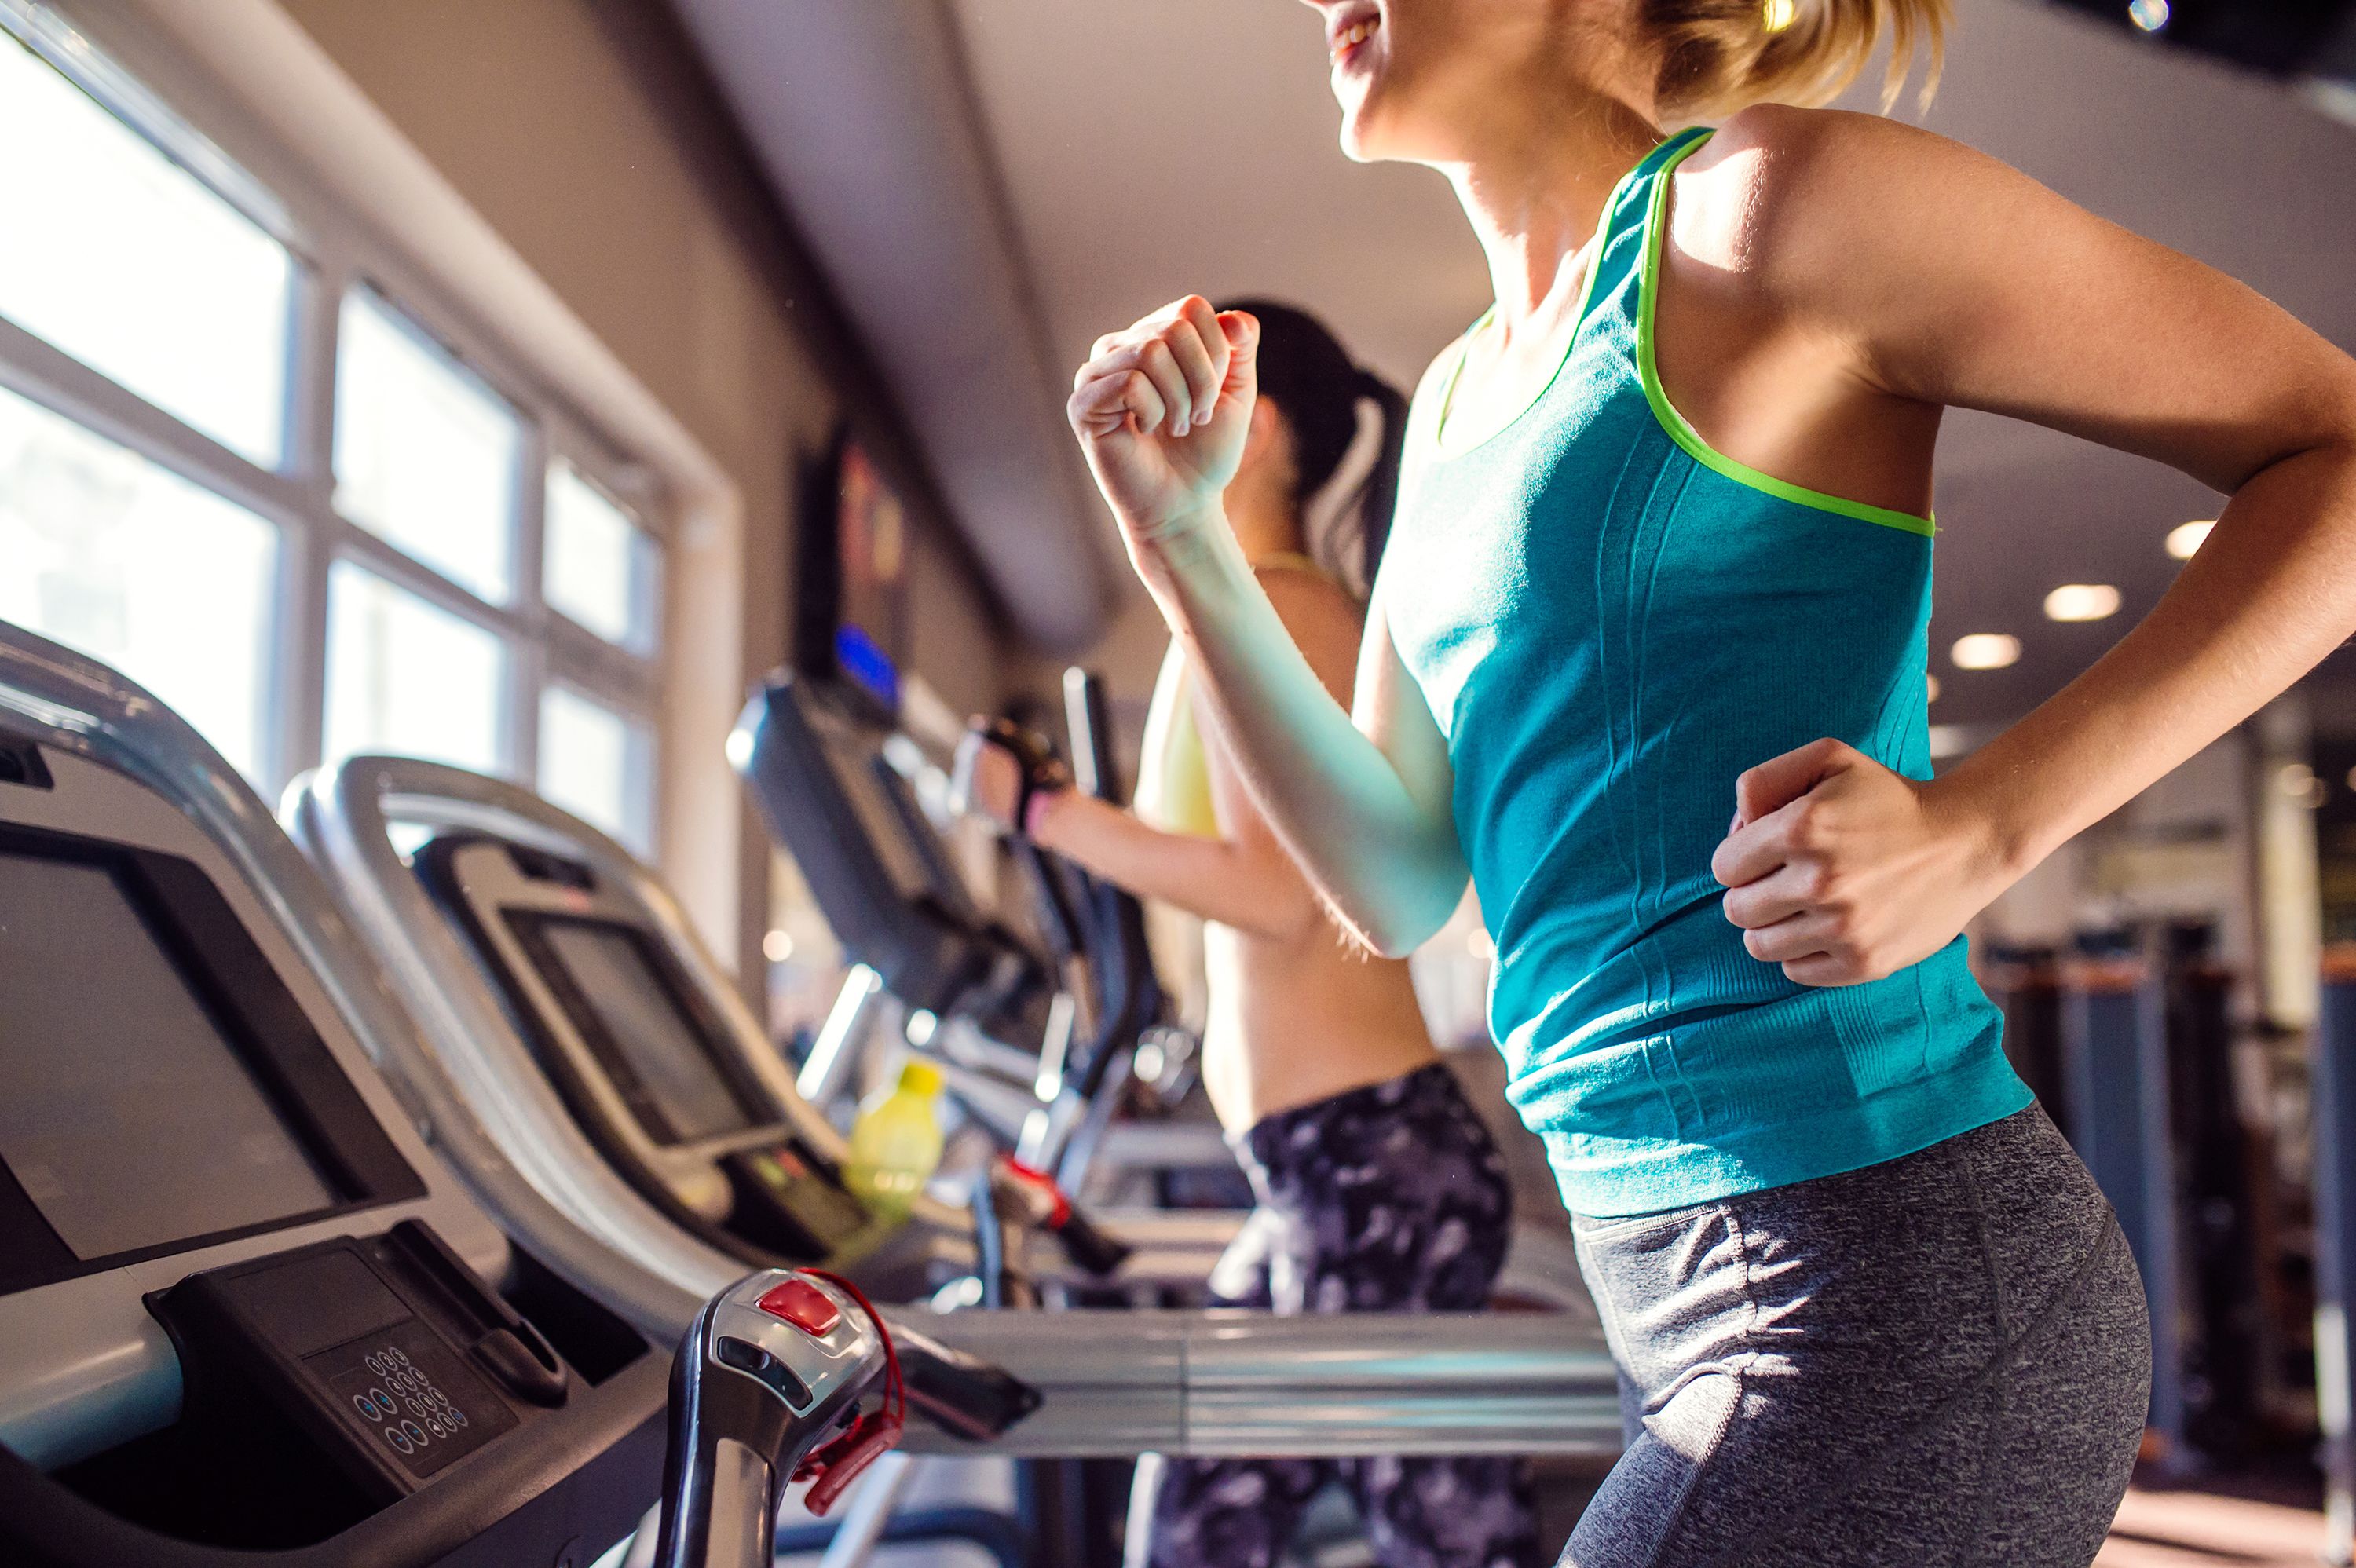 Treadmill workouts to help you increase the burn | CNN